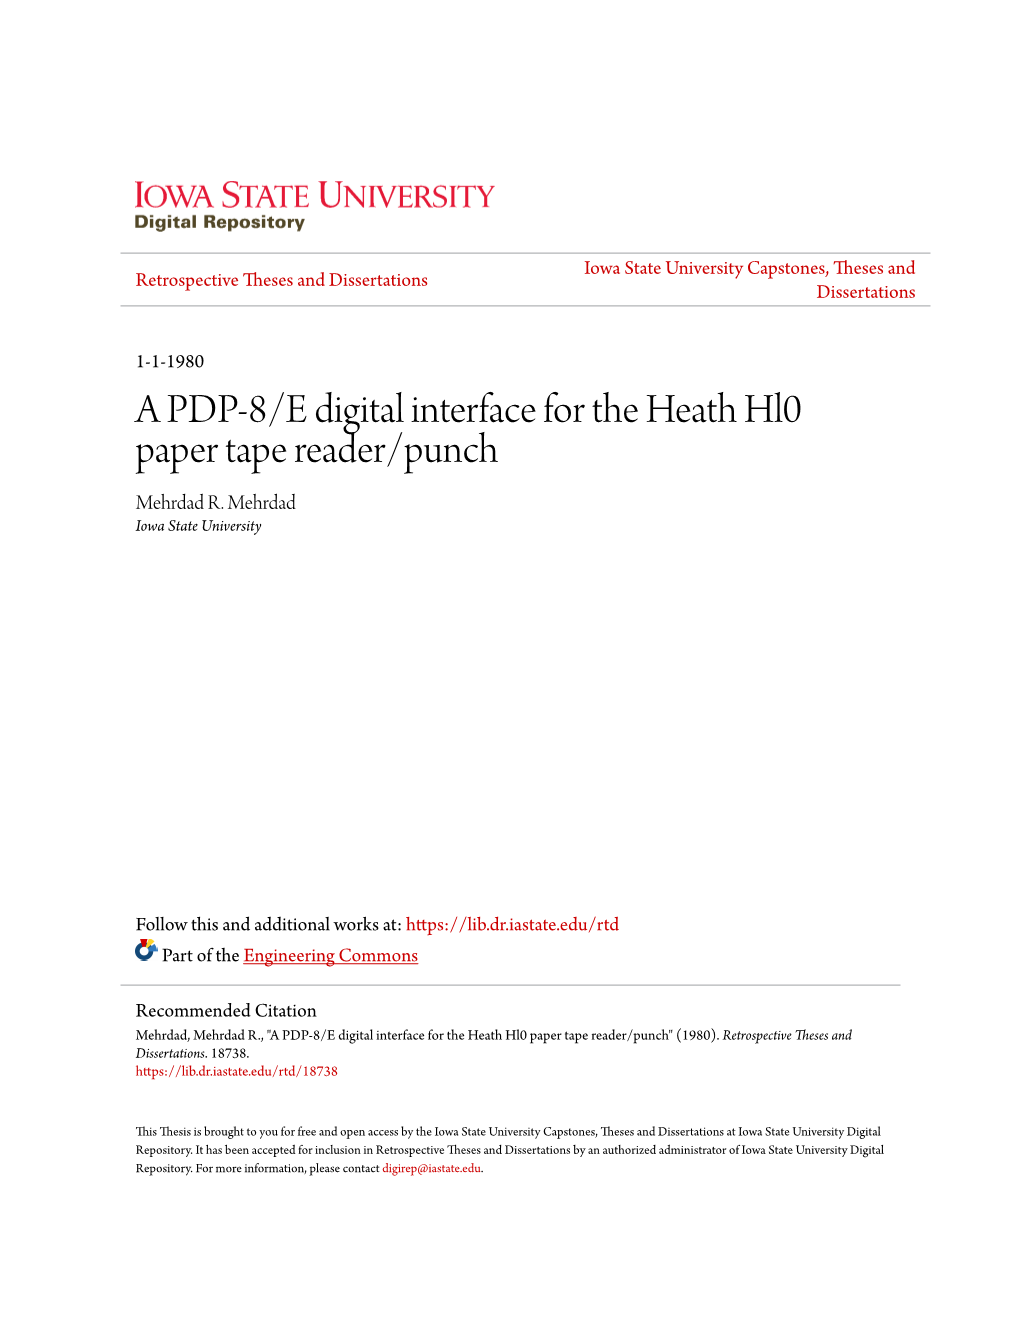 A PDP-8/E Digital Interface for the Heath Hl0 Paper Tape Reader/Punch Mehrdad R